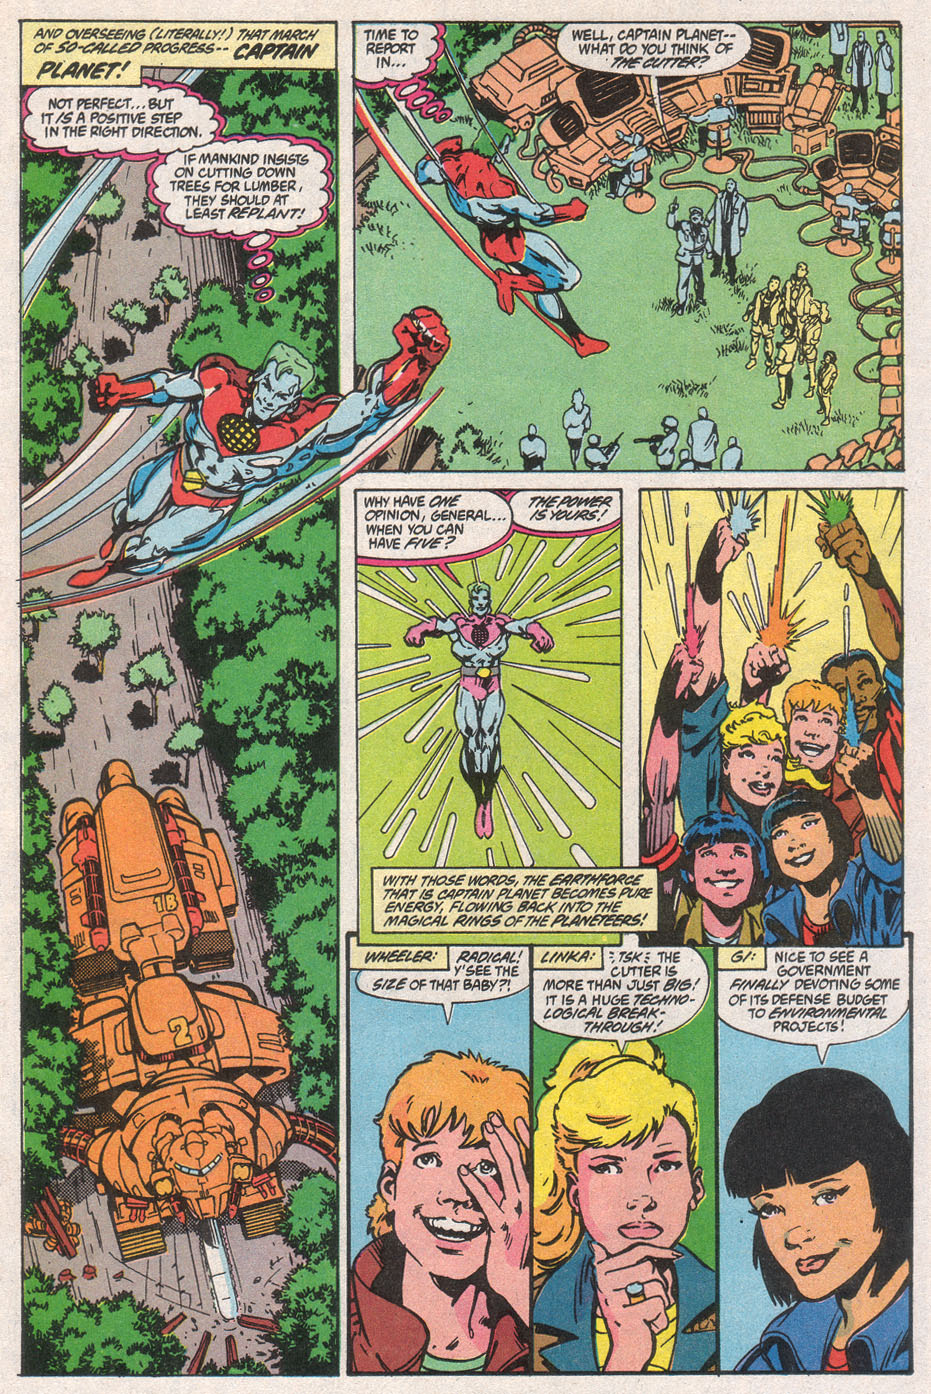 Captain Planet and the Planeteers 11 Page 4